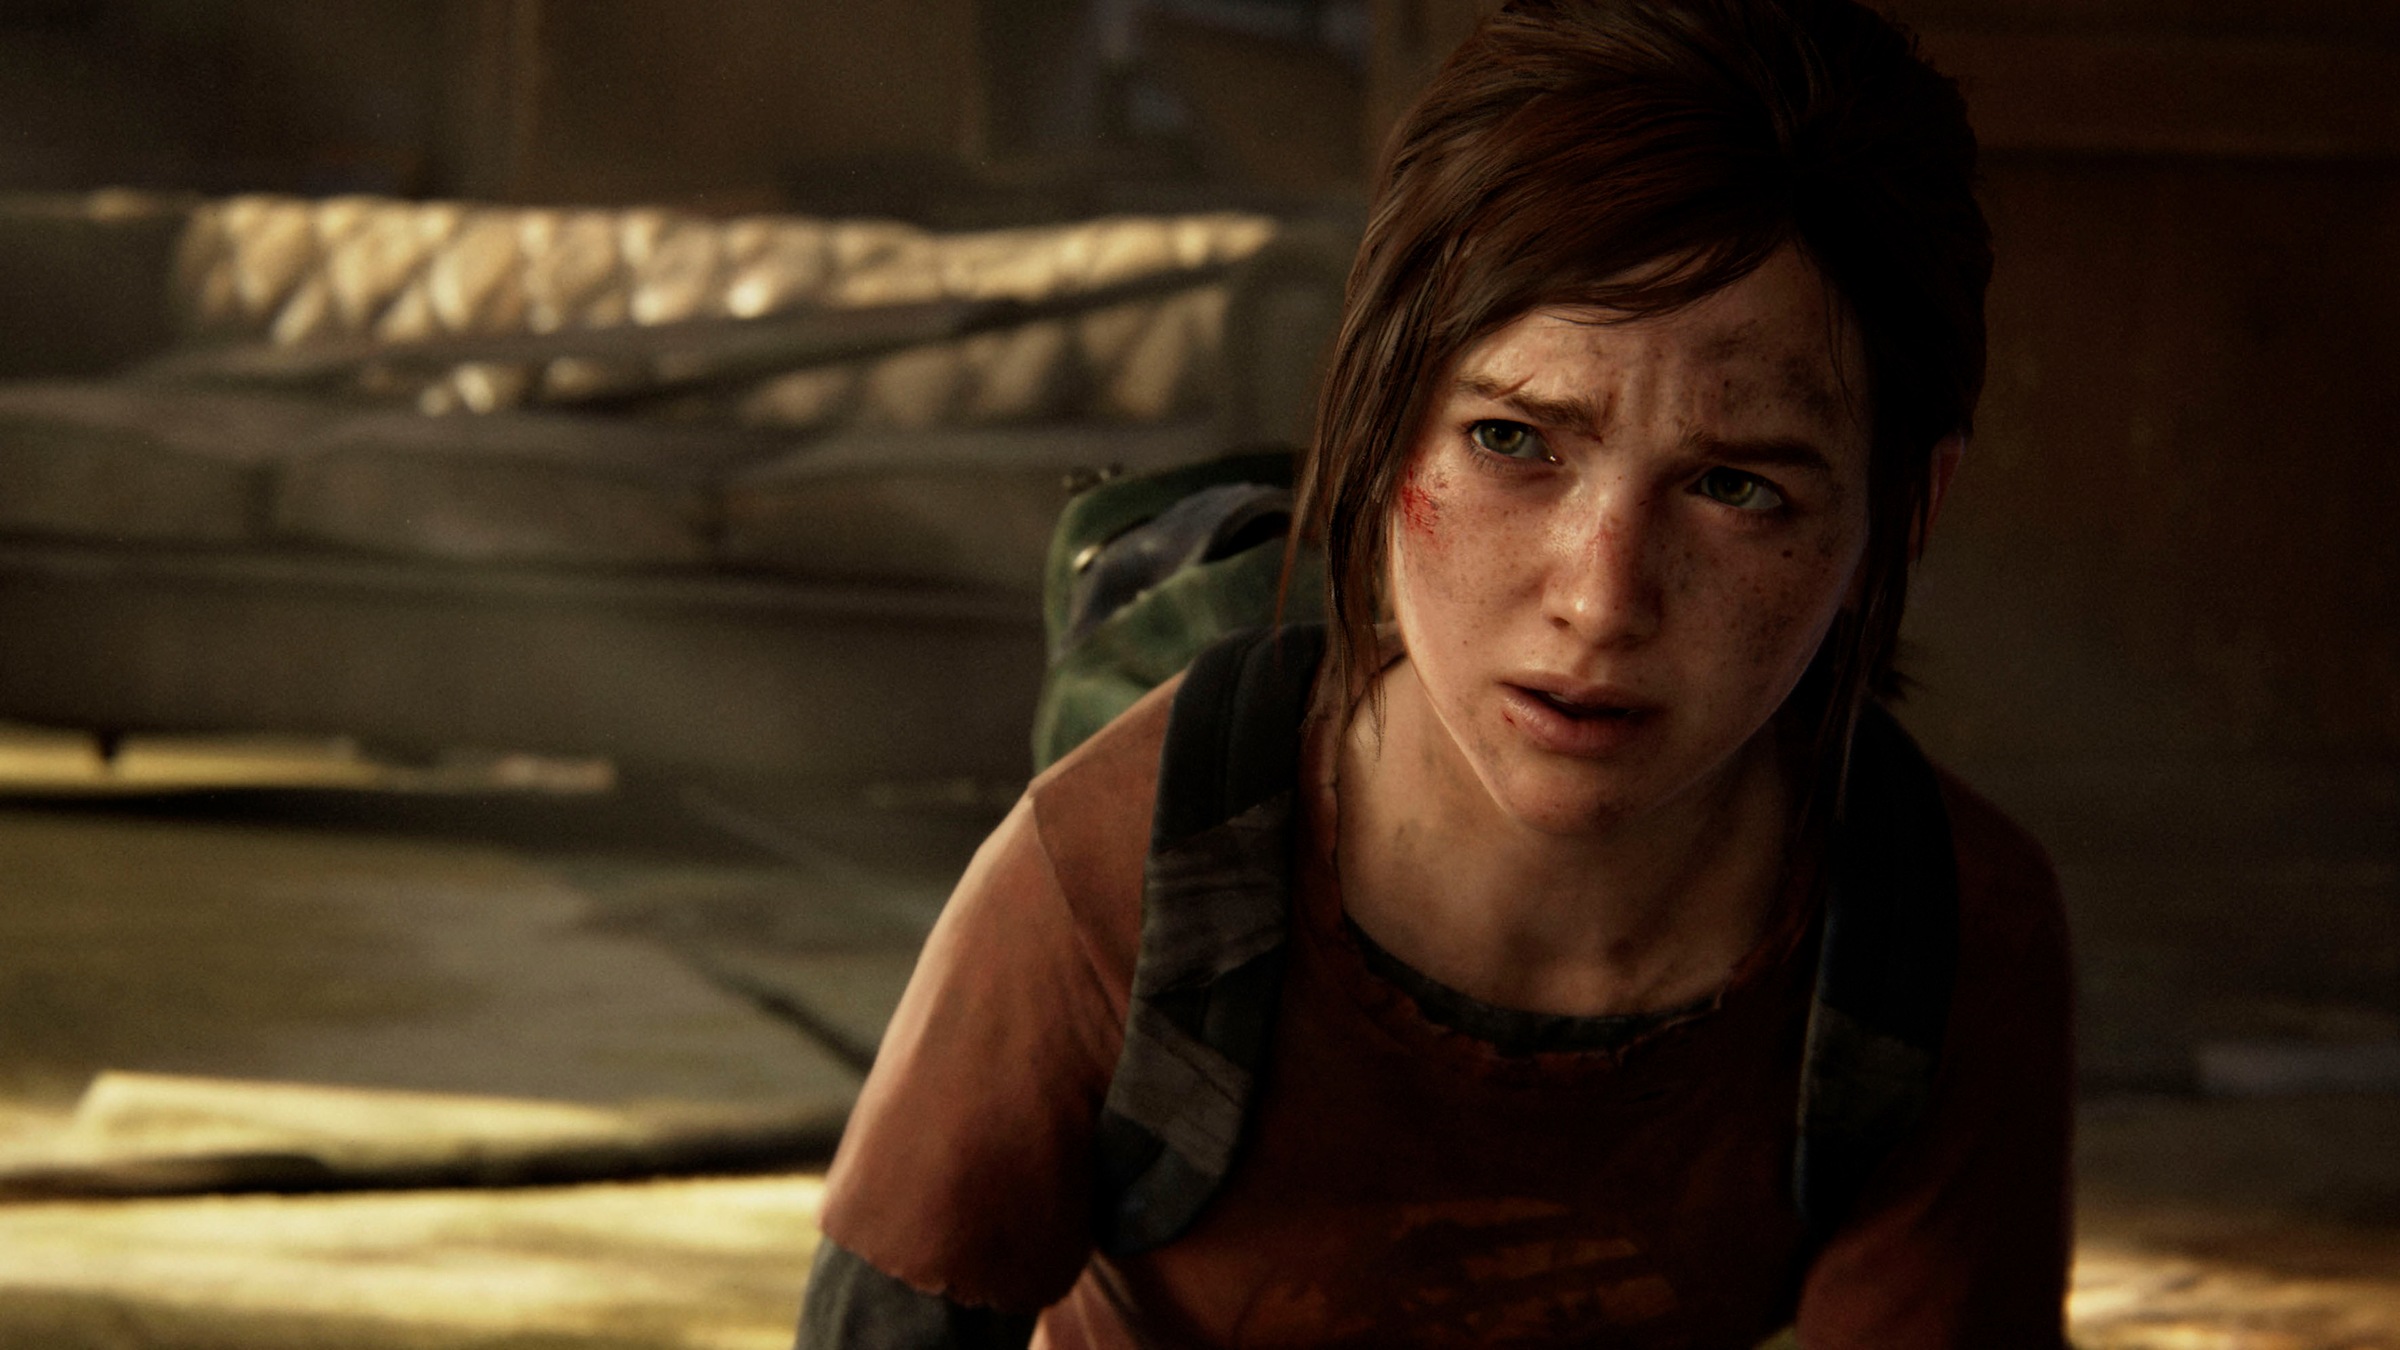 PlayStation 5 Spielekonsole »The Last of Us Part I PS5«